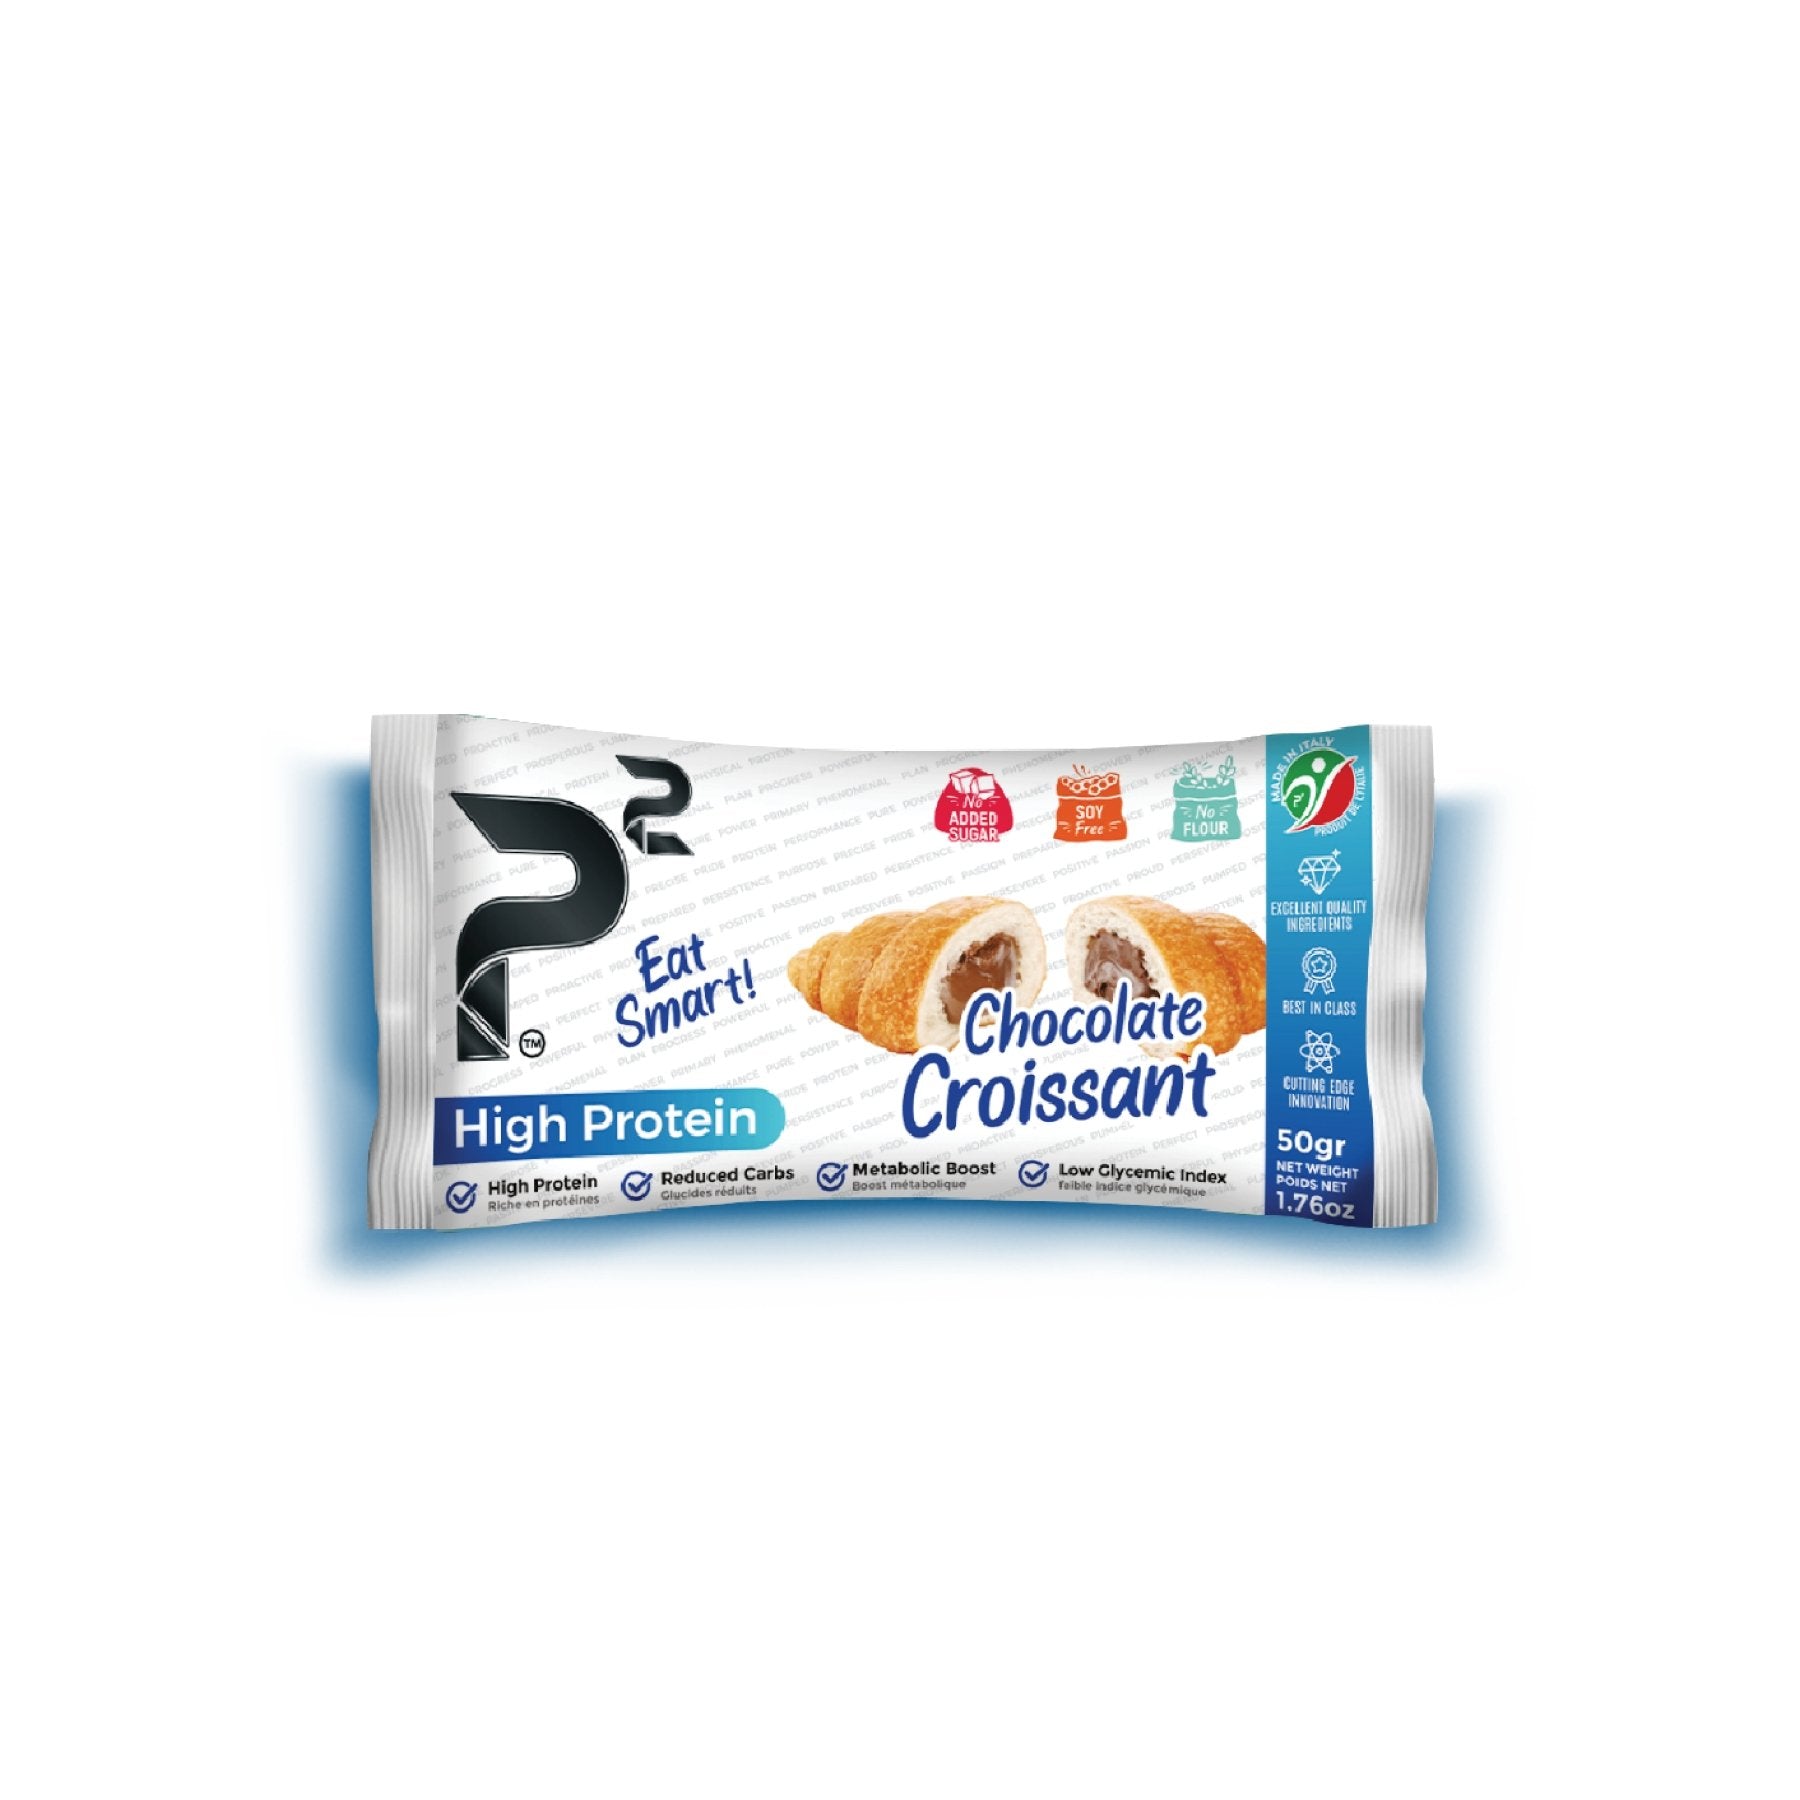 High Protein Chocolate Croissant. 32g protein and 2g net carbs per 100g. No added sugar, Soy free, No flour.